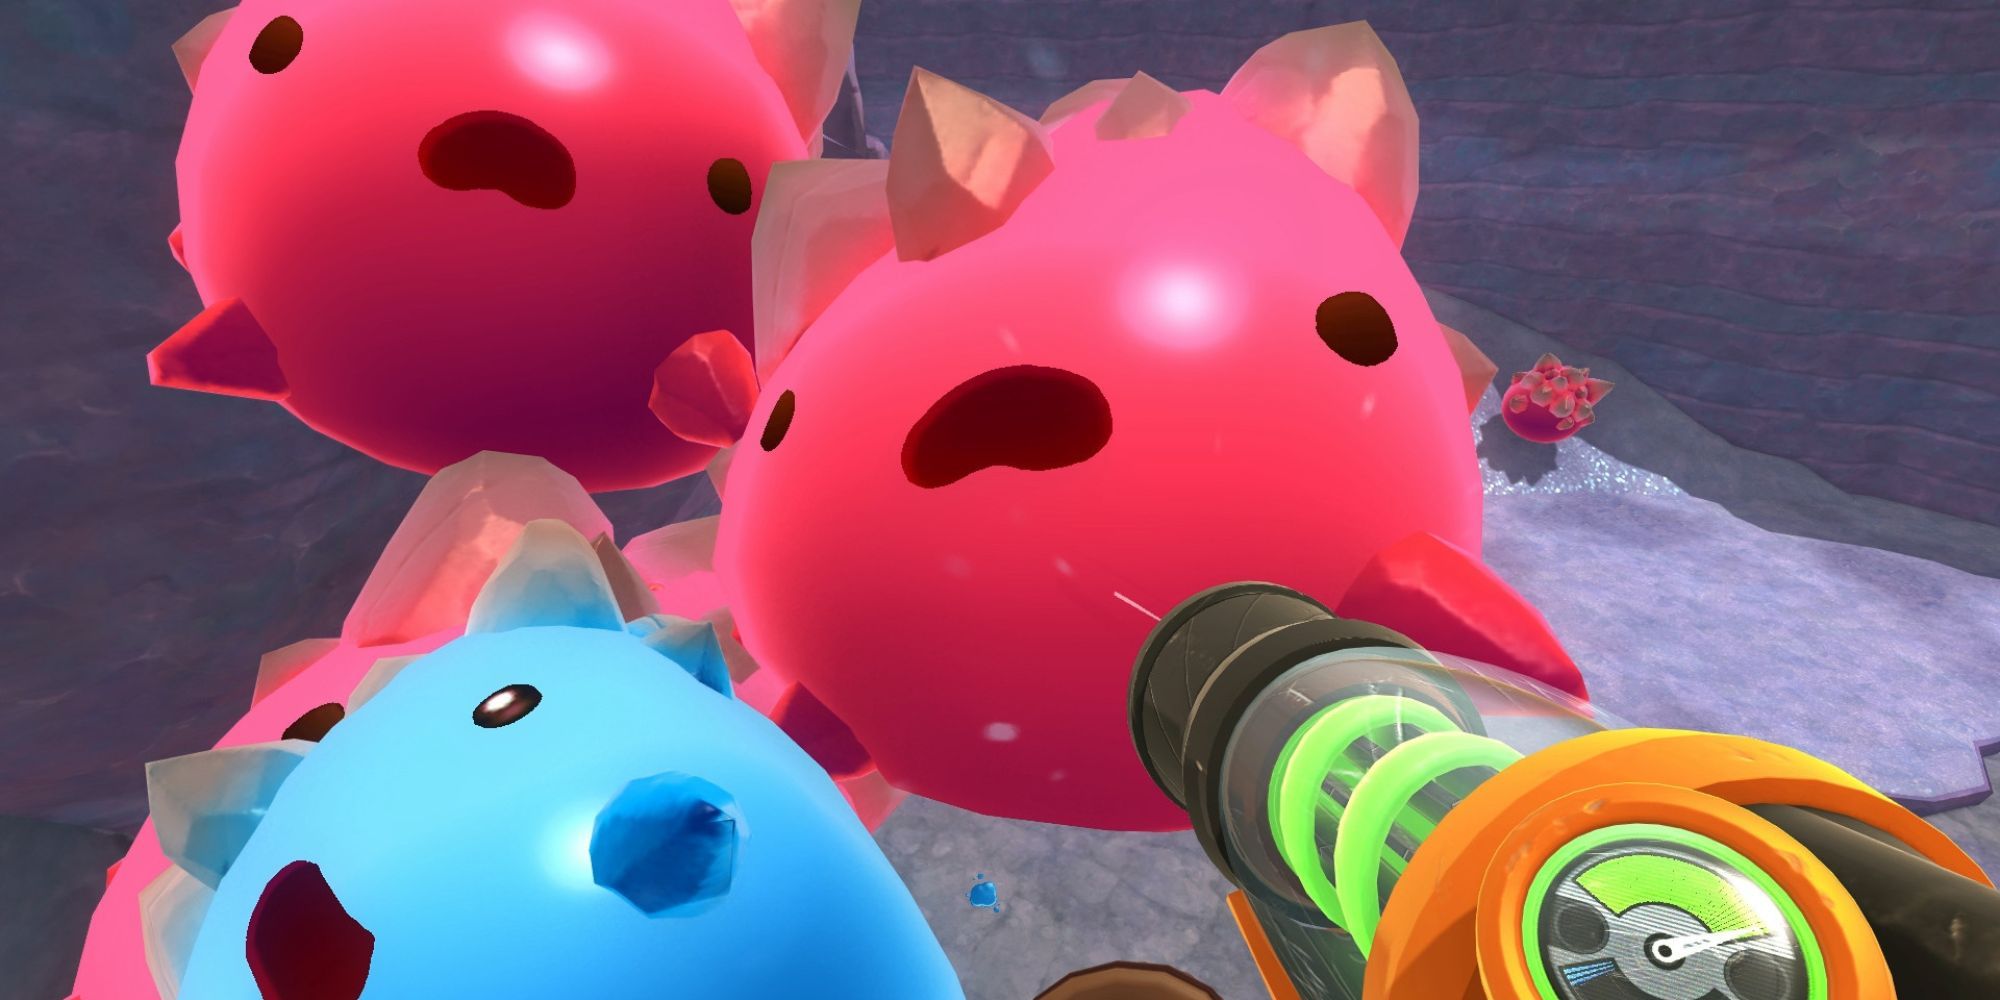 The player trying to suck up big slimes in Slime Rancher